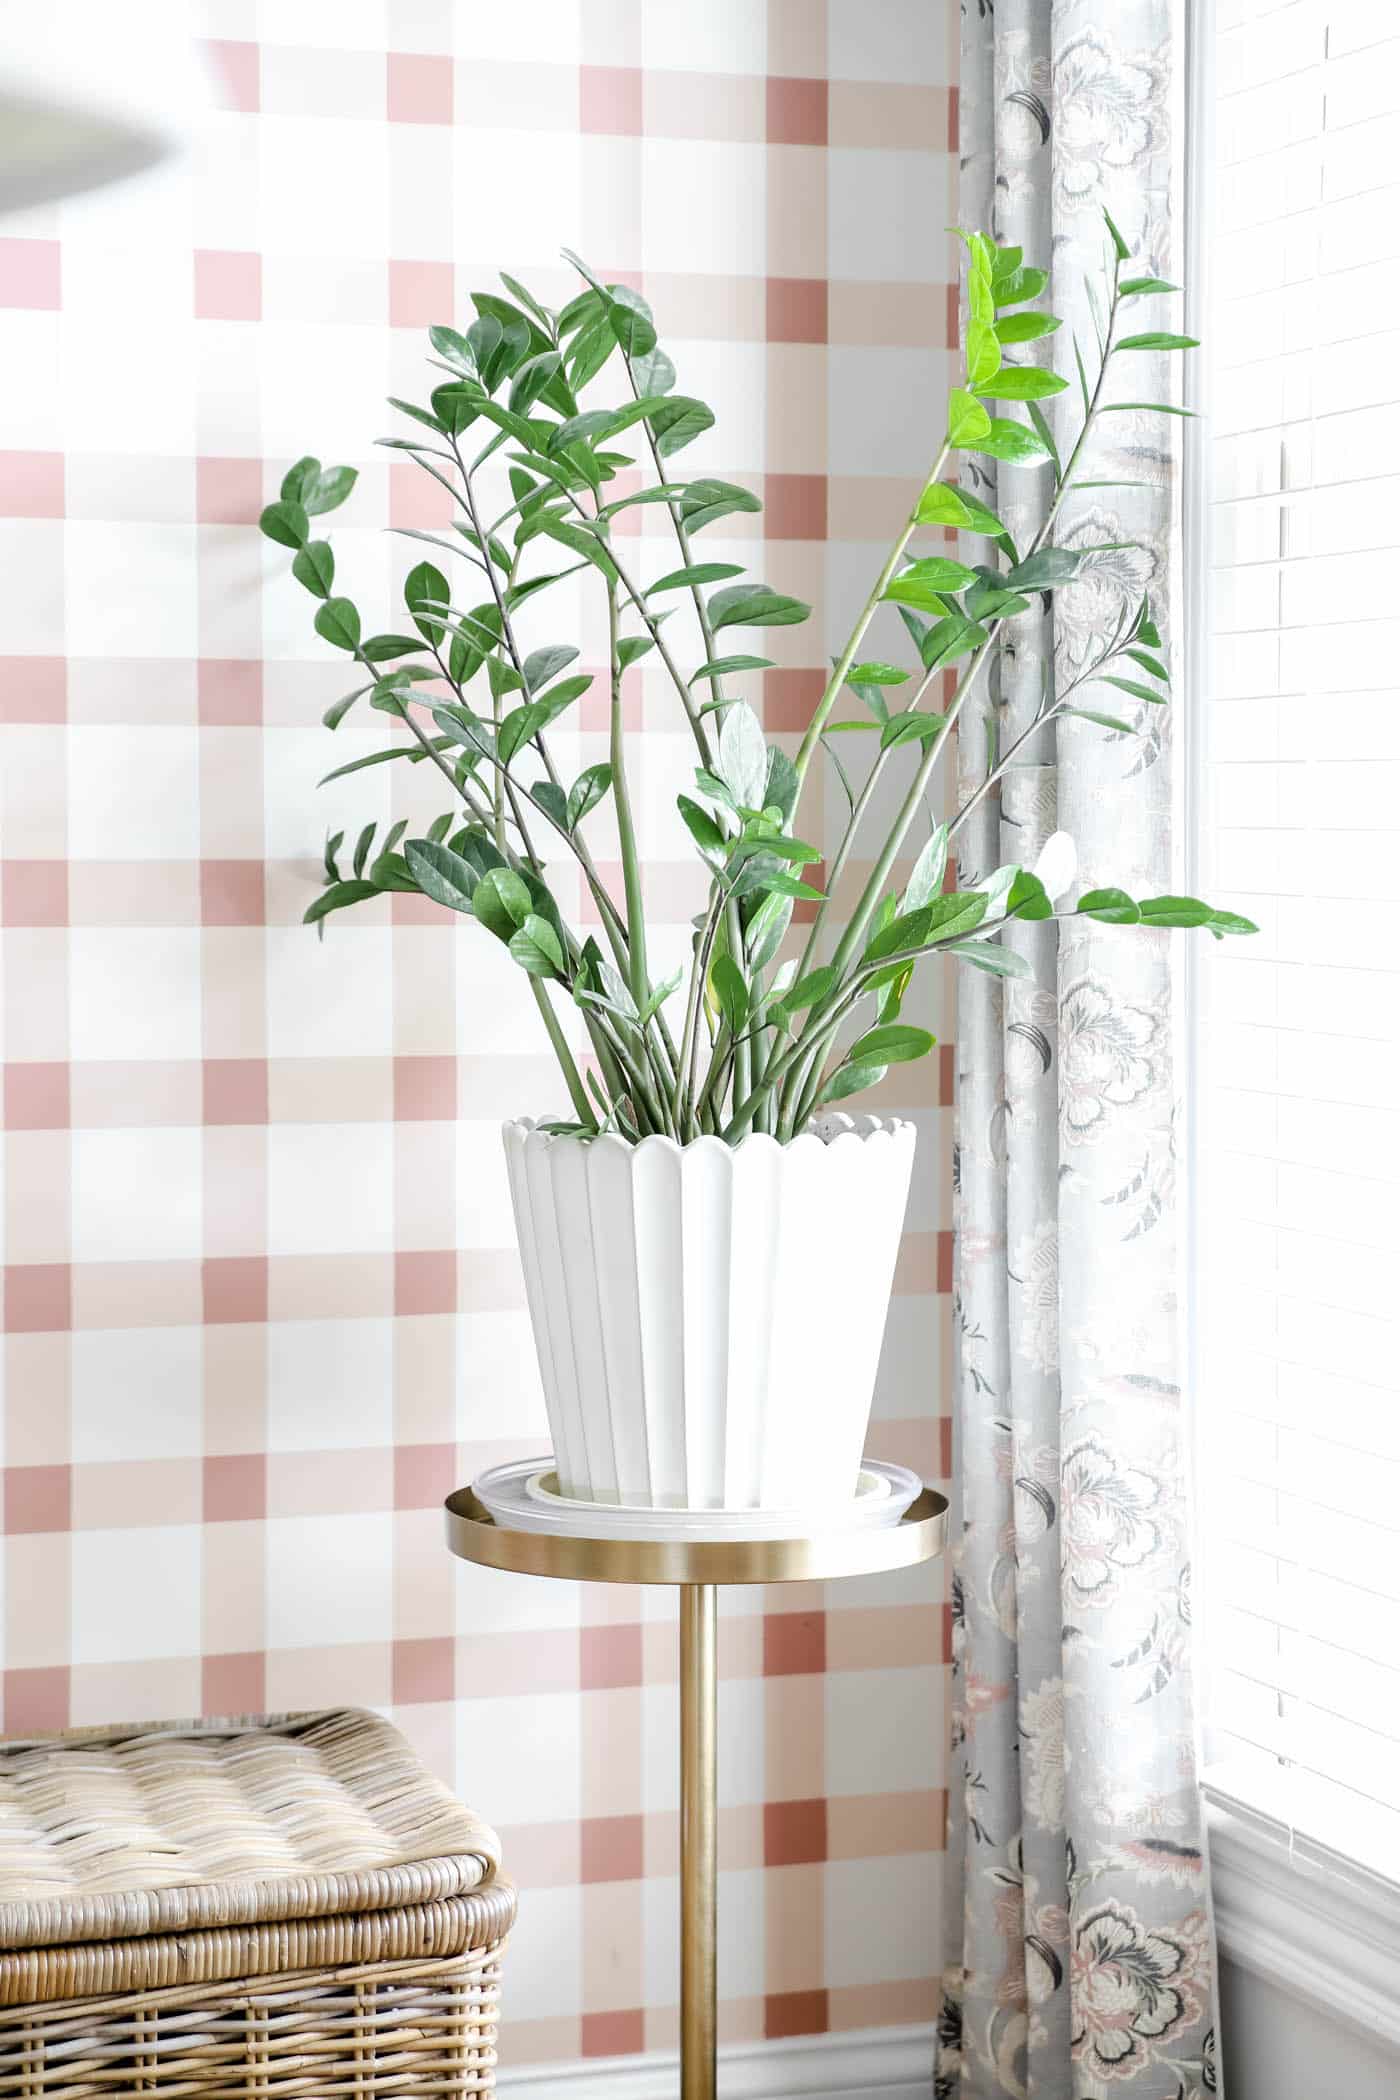 ZZ plant in a scalloped plant with a plaid pink and white wall behind it.